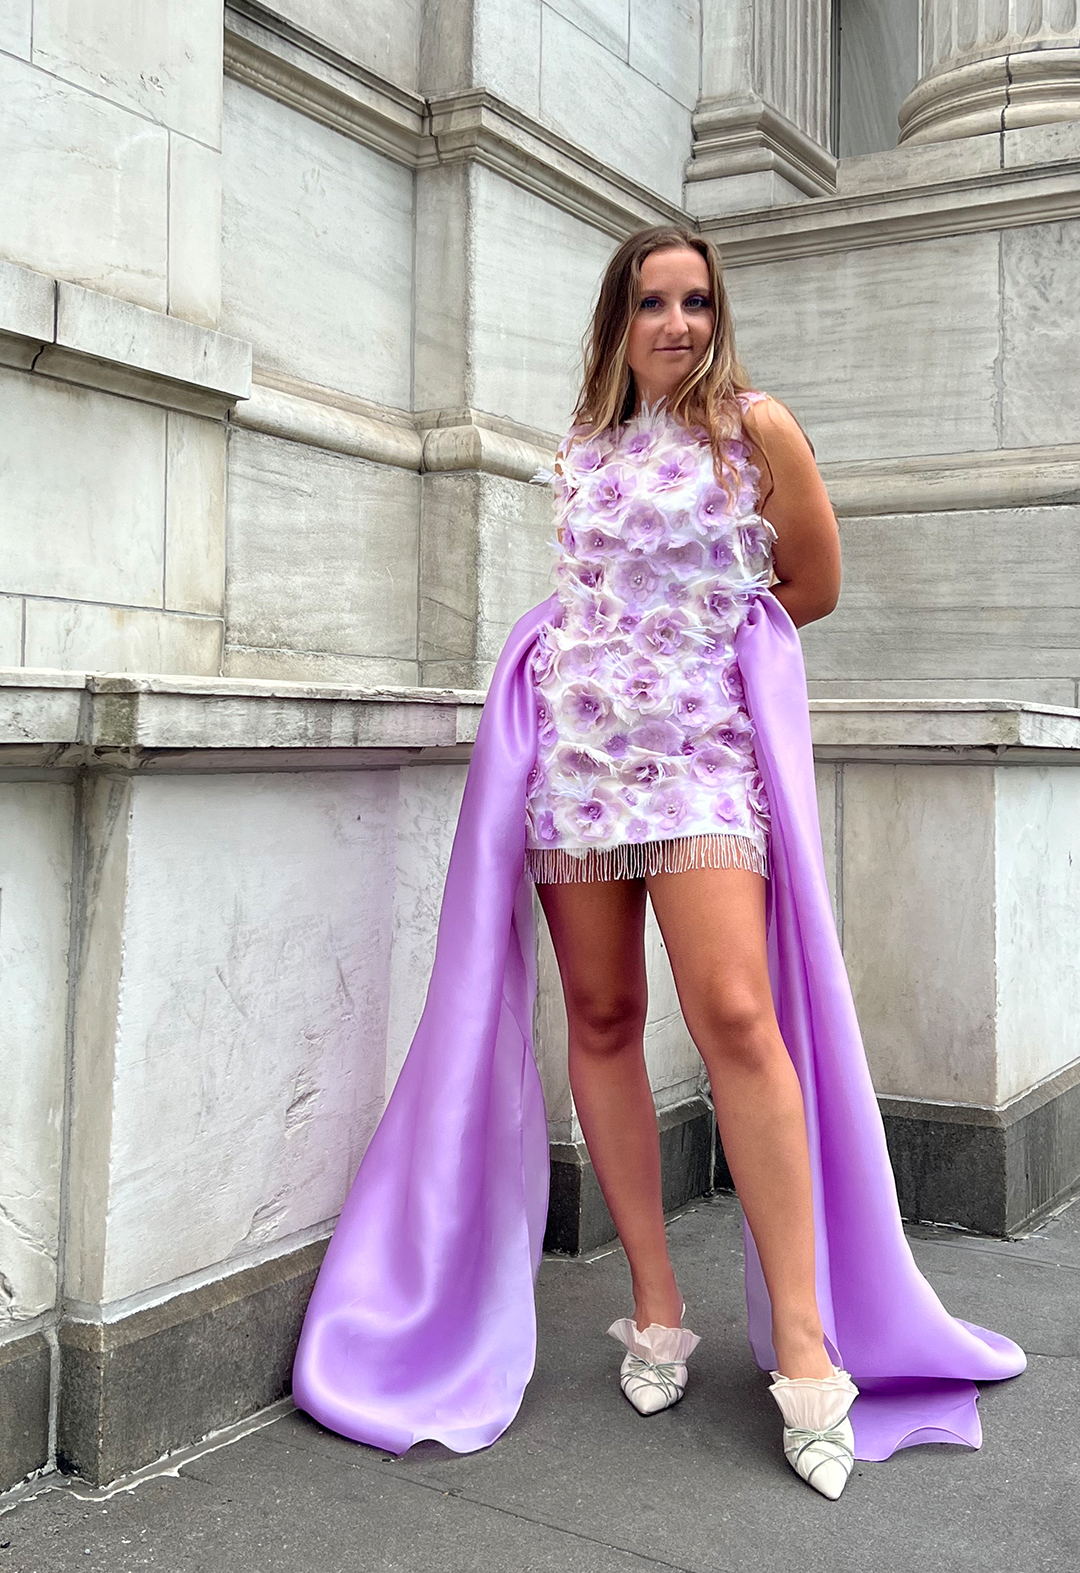 This dress is made of silk satin, organza, and chiffon. The photo shows a girl wearing a white satin mini dress with lilac embellished chiffon and organza flowers and a beaded fringe hem. She is smiling and her hands are behind her back.  Gathered lilac organza extends from the side seams to the ground. The background is a white marble building. 